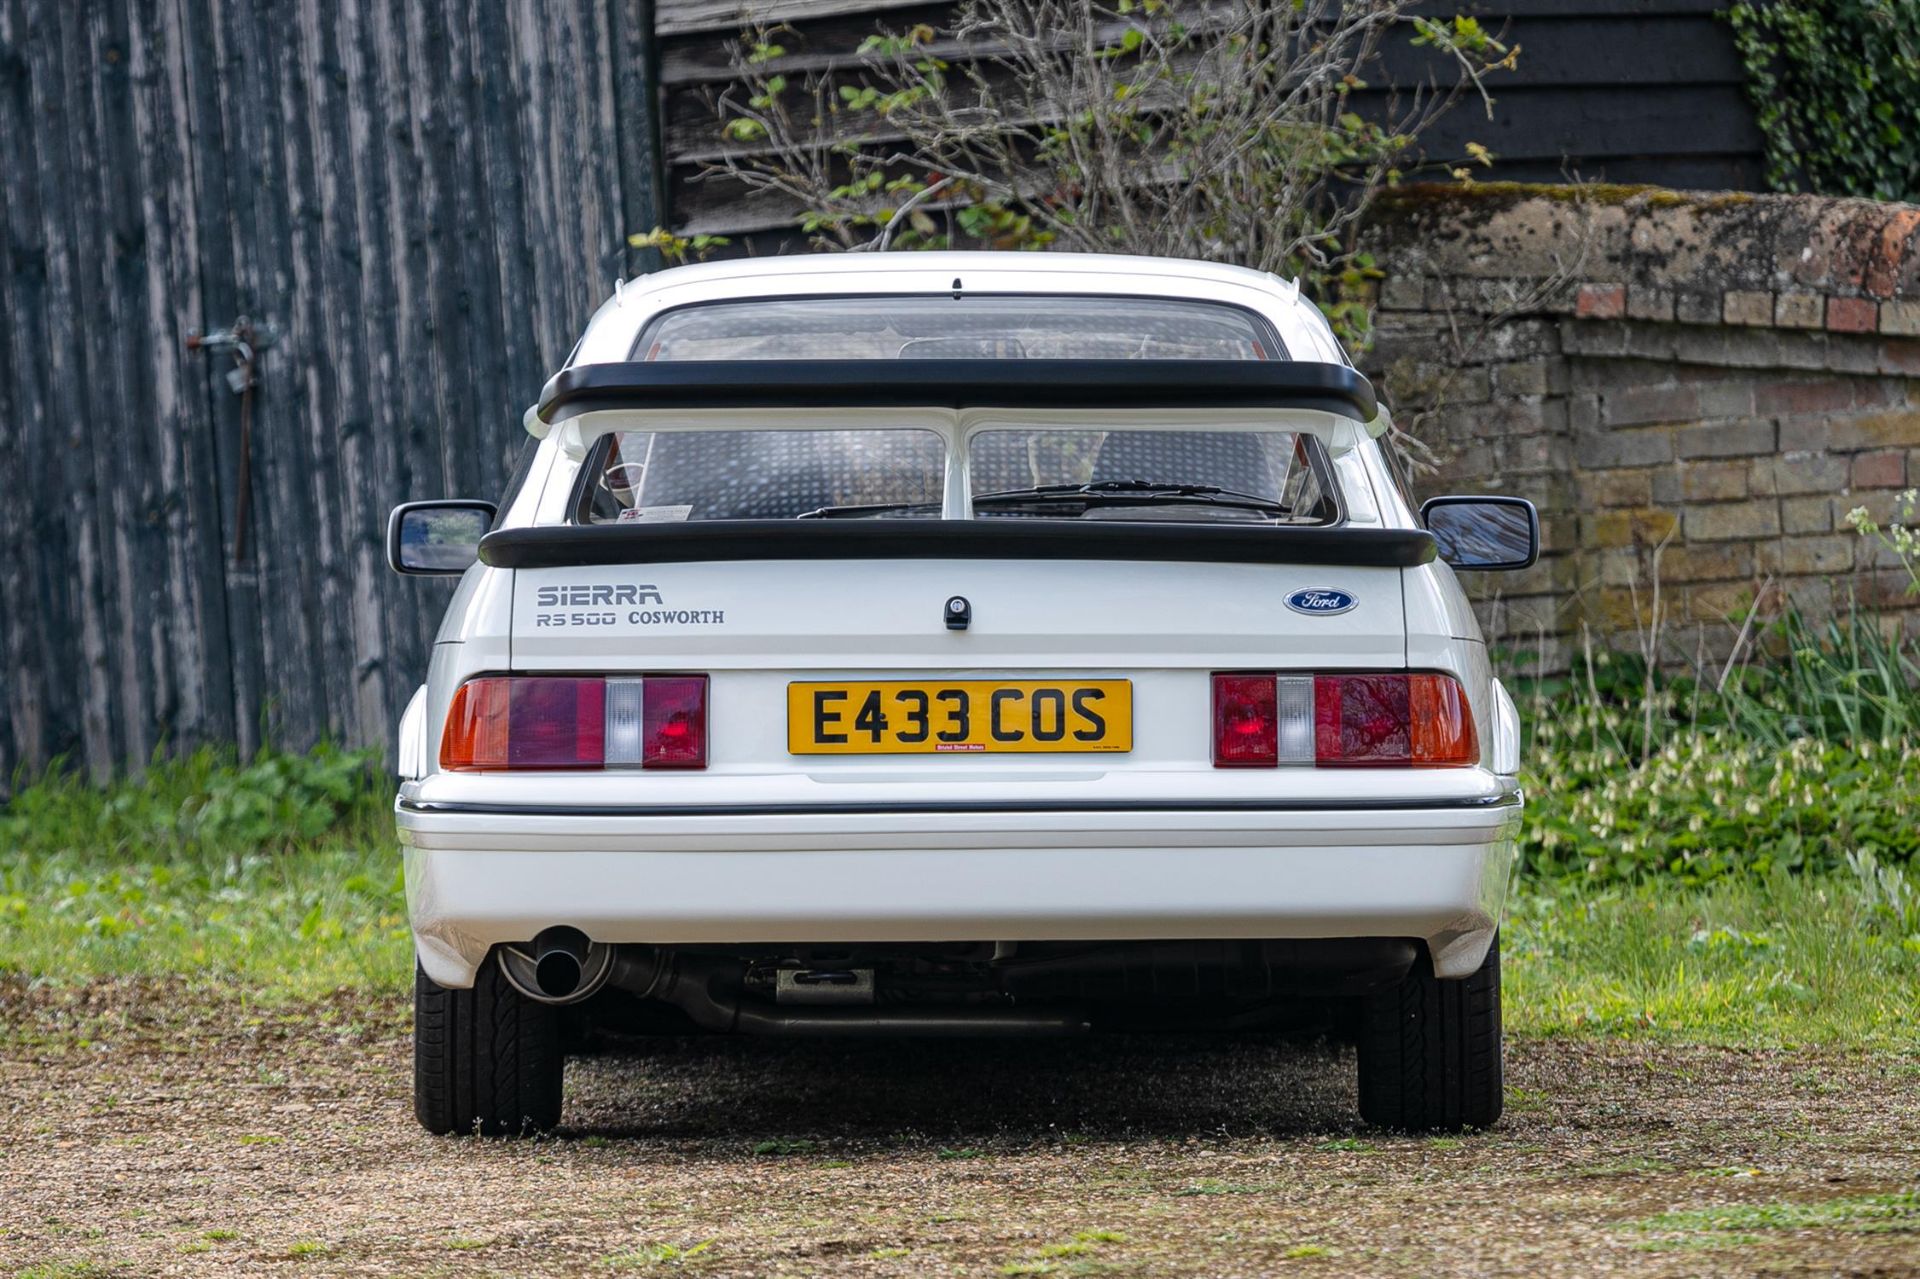 1987 Ford Sierra RS500 Cosworth #433 - 12,805 Miles - Image 7 of 10